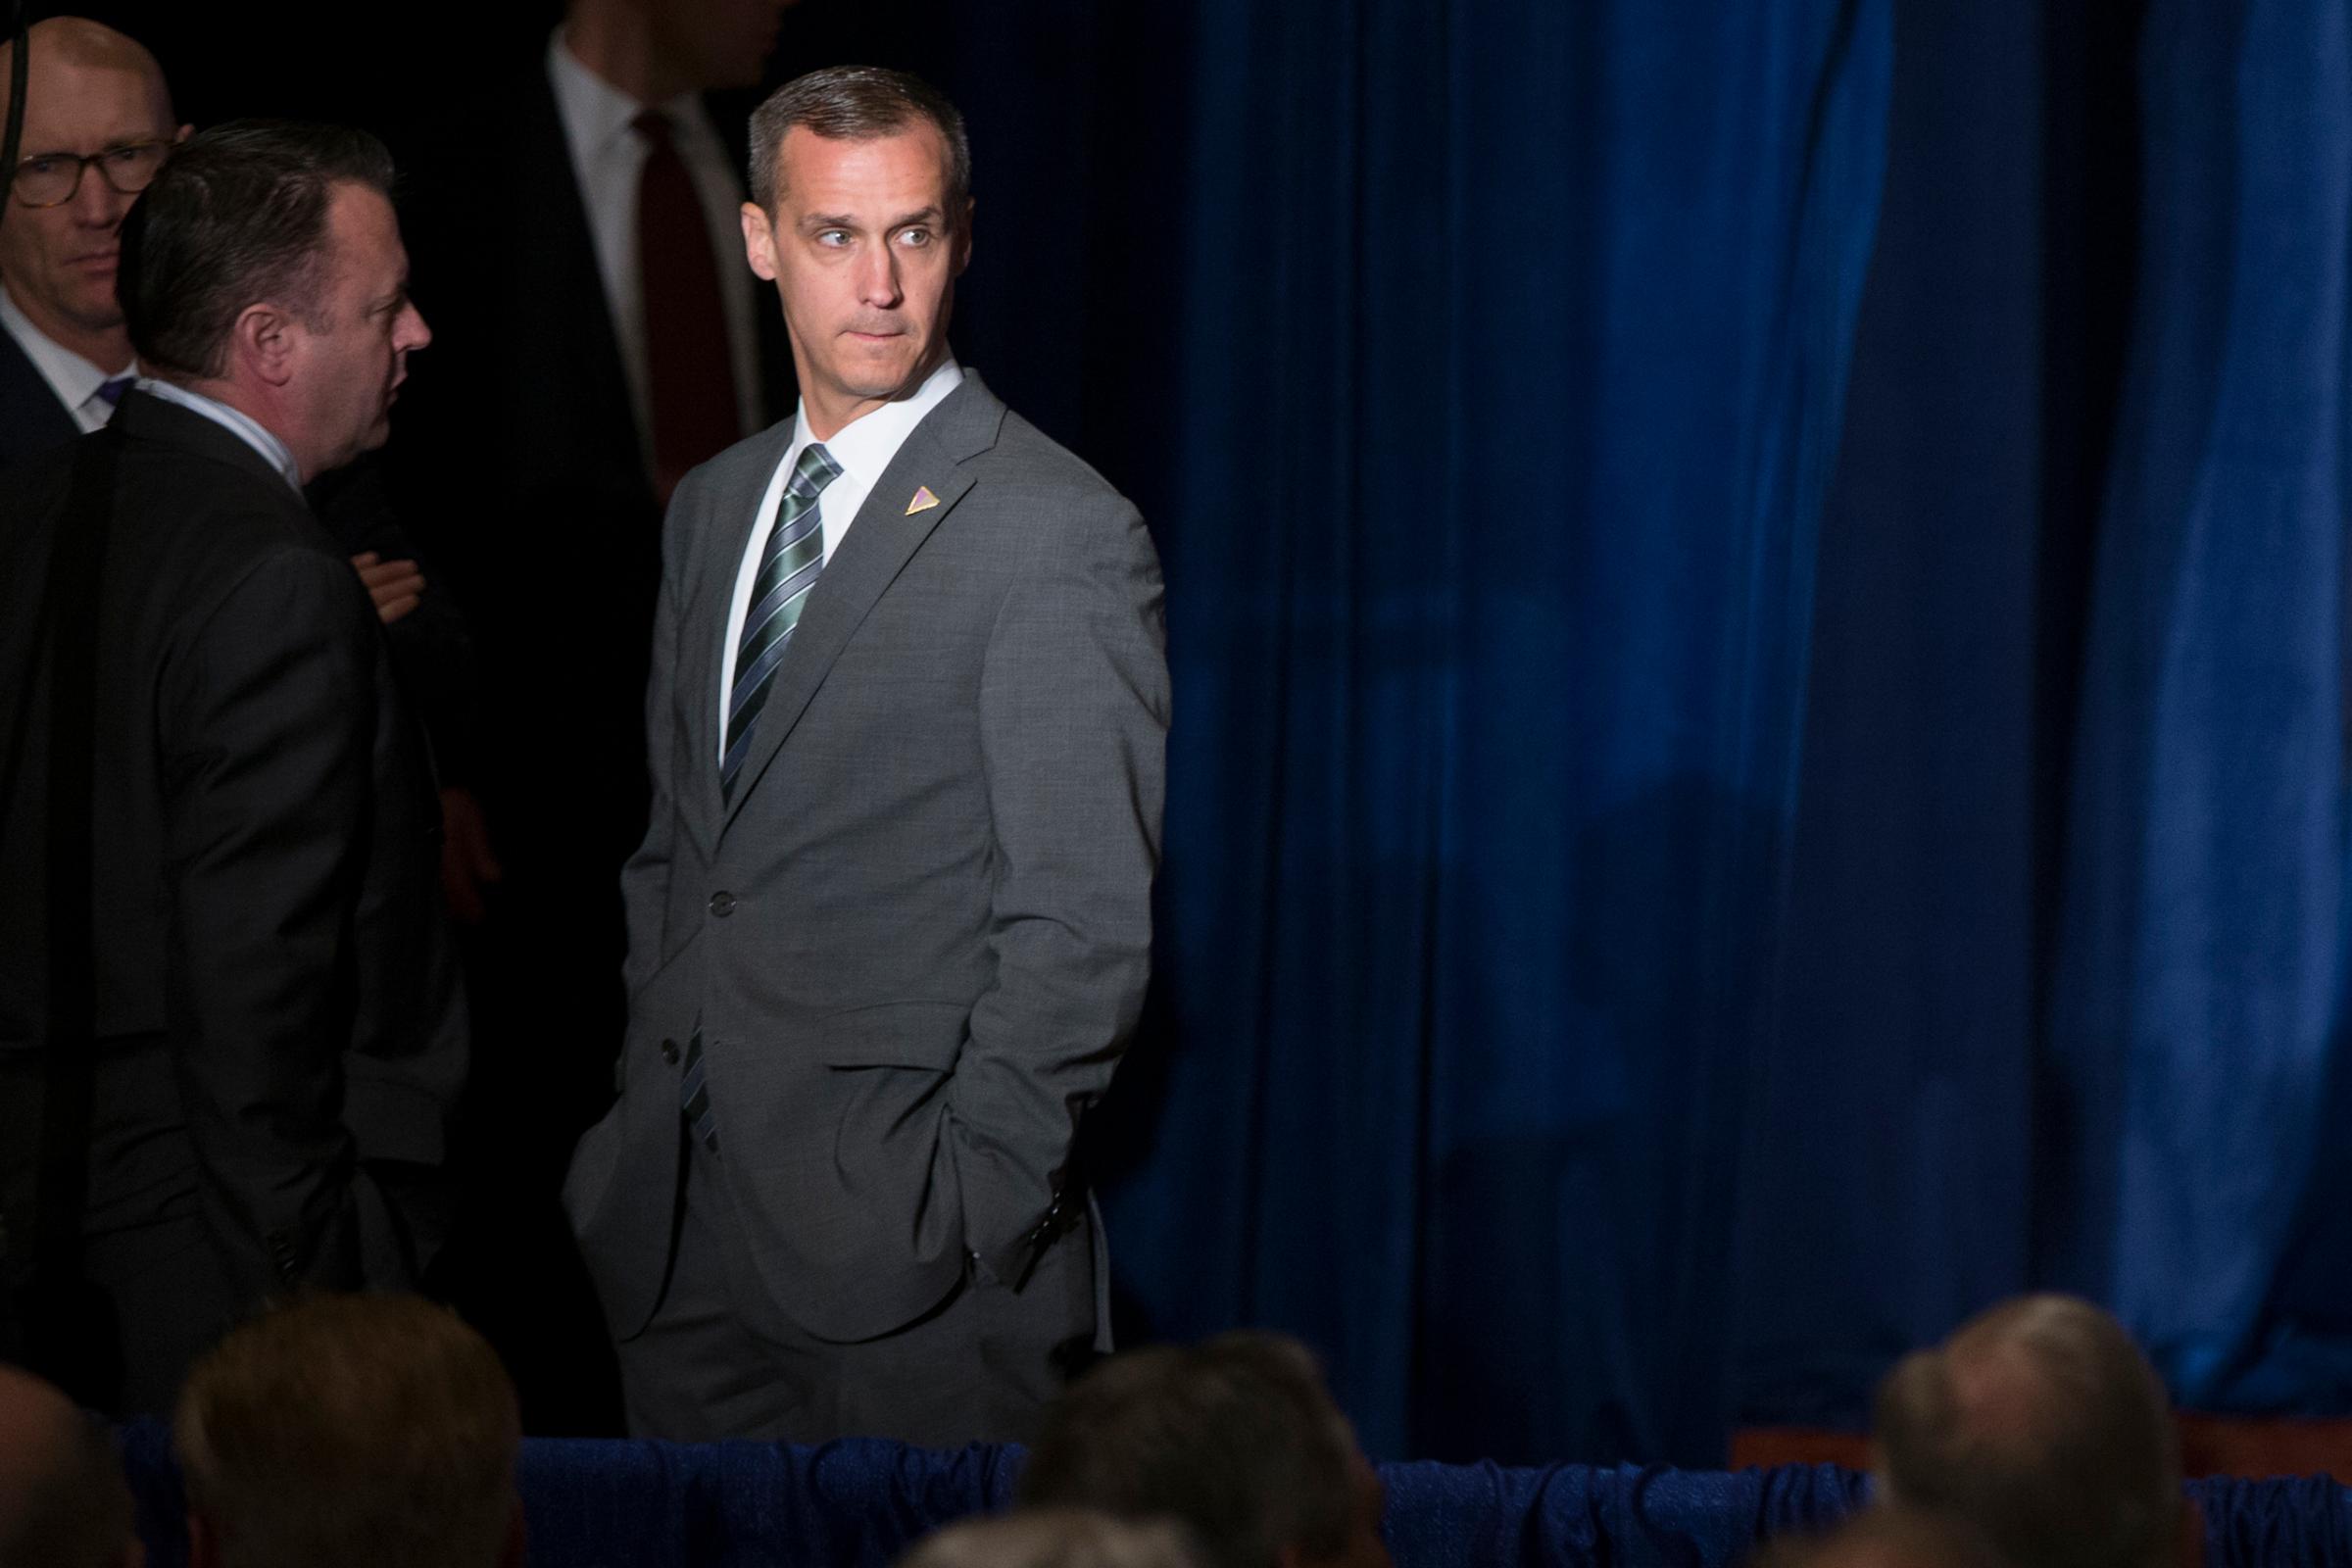 Corey Lewandowski, campaign manager for Republican presidential candidate Donald Trump, waits before the start of a foreign policy speech at the Mayflower Hotel in Washington, Wednesday, April 27, 2016.